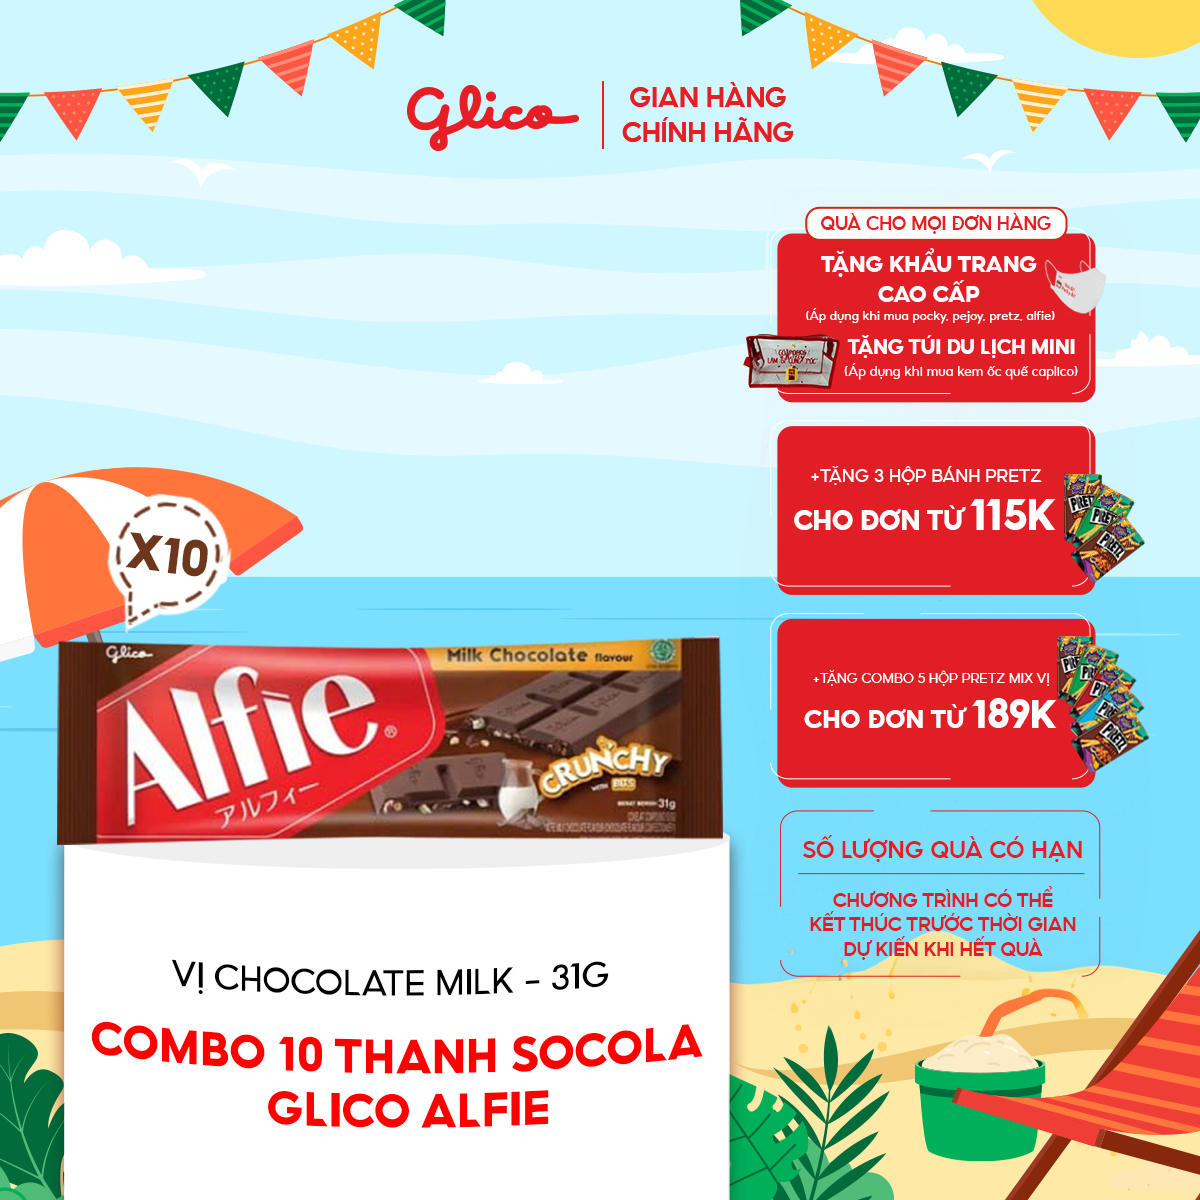 Combo 10 Thanh Socola Dạng Thanh Glico Alfie